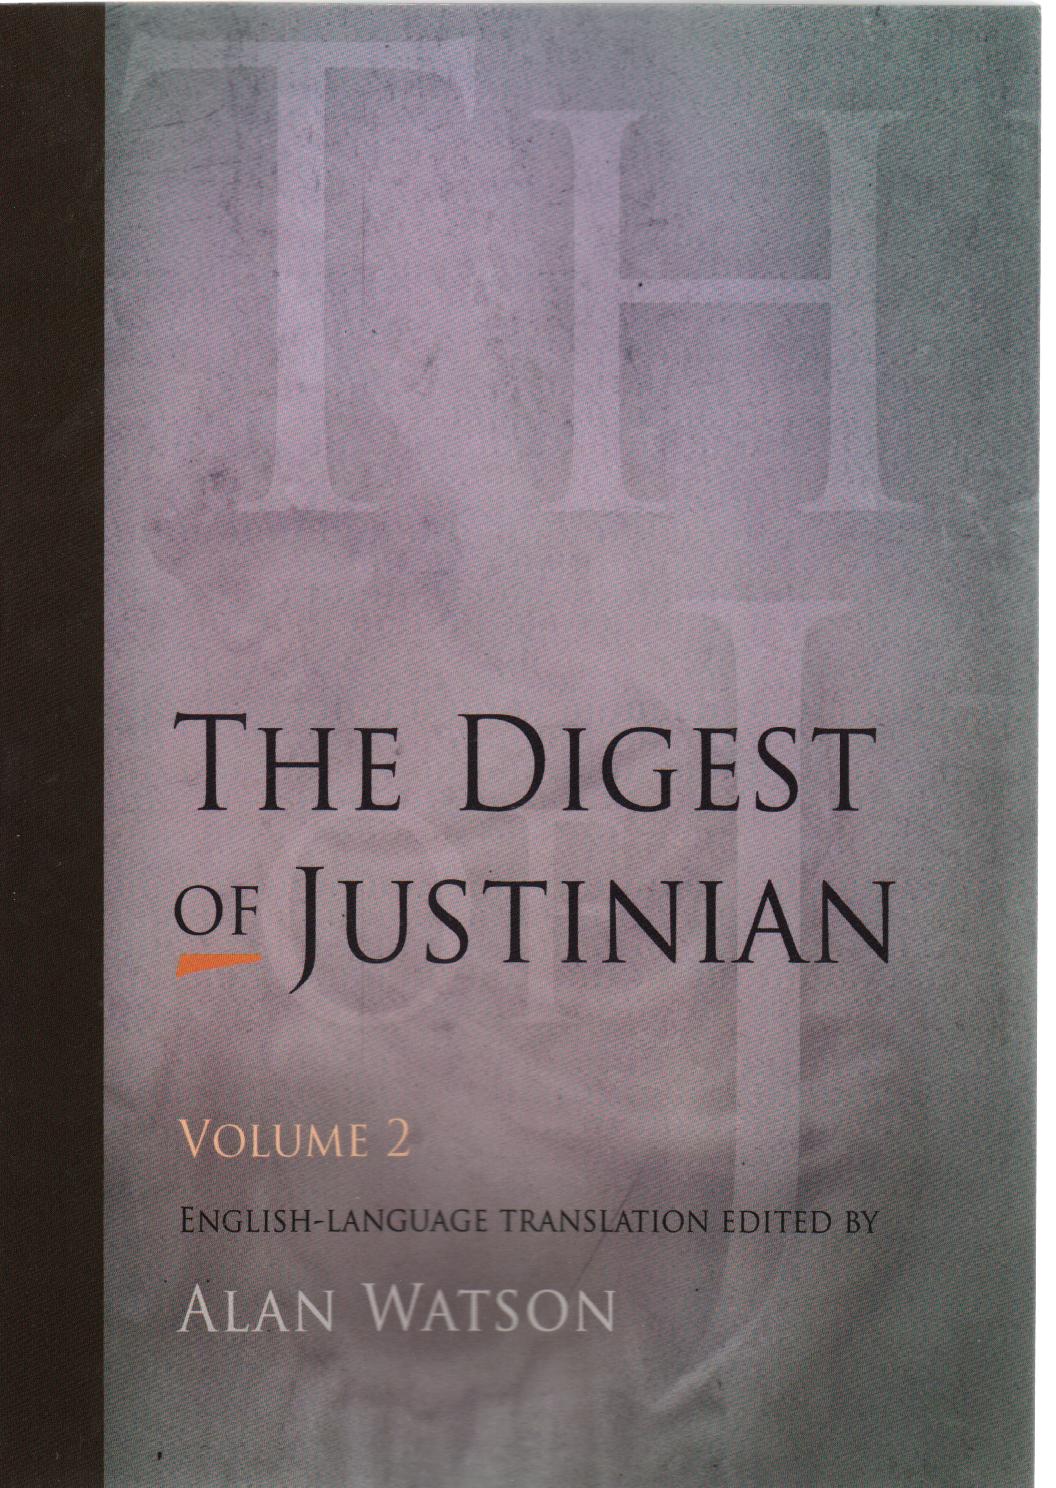 The Digest of Justinian Volume 2